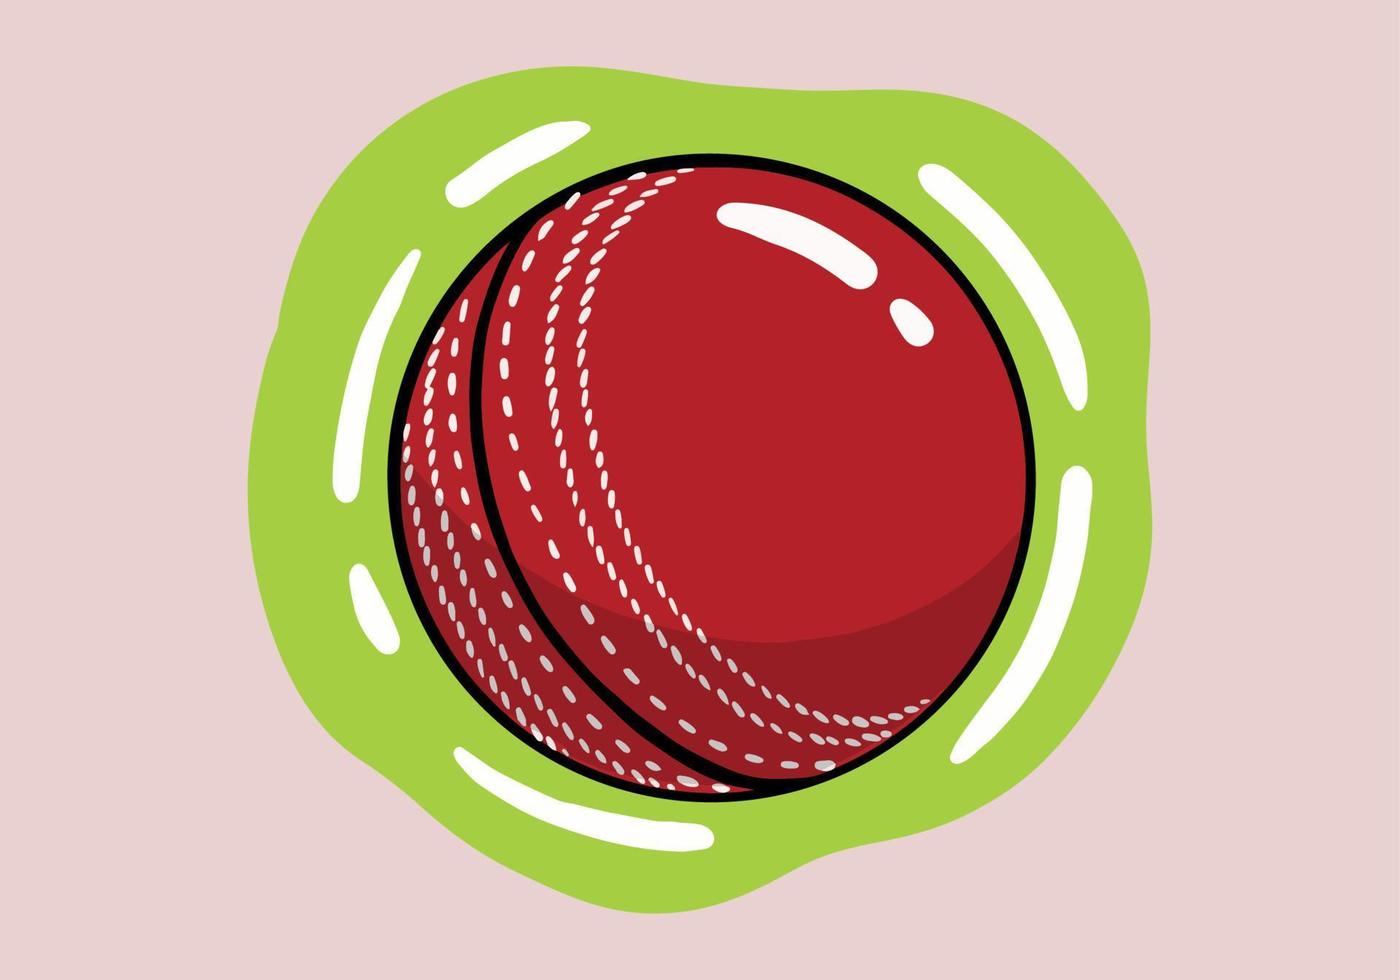 Hand drawn cricket balls icon. Game equipment. Professional sport, classic ball for official competitions and tournaments. Isolated illustration. vector